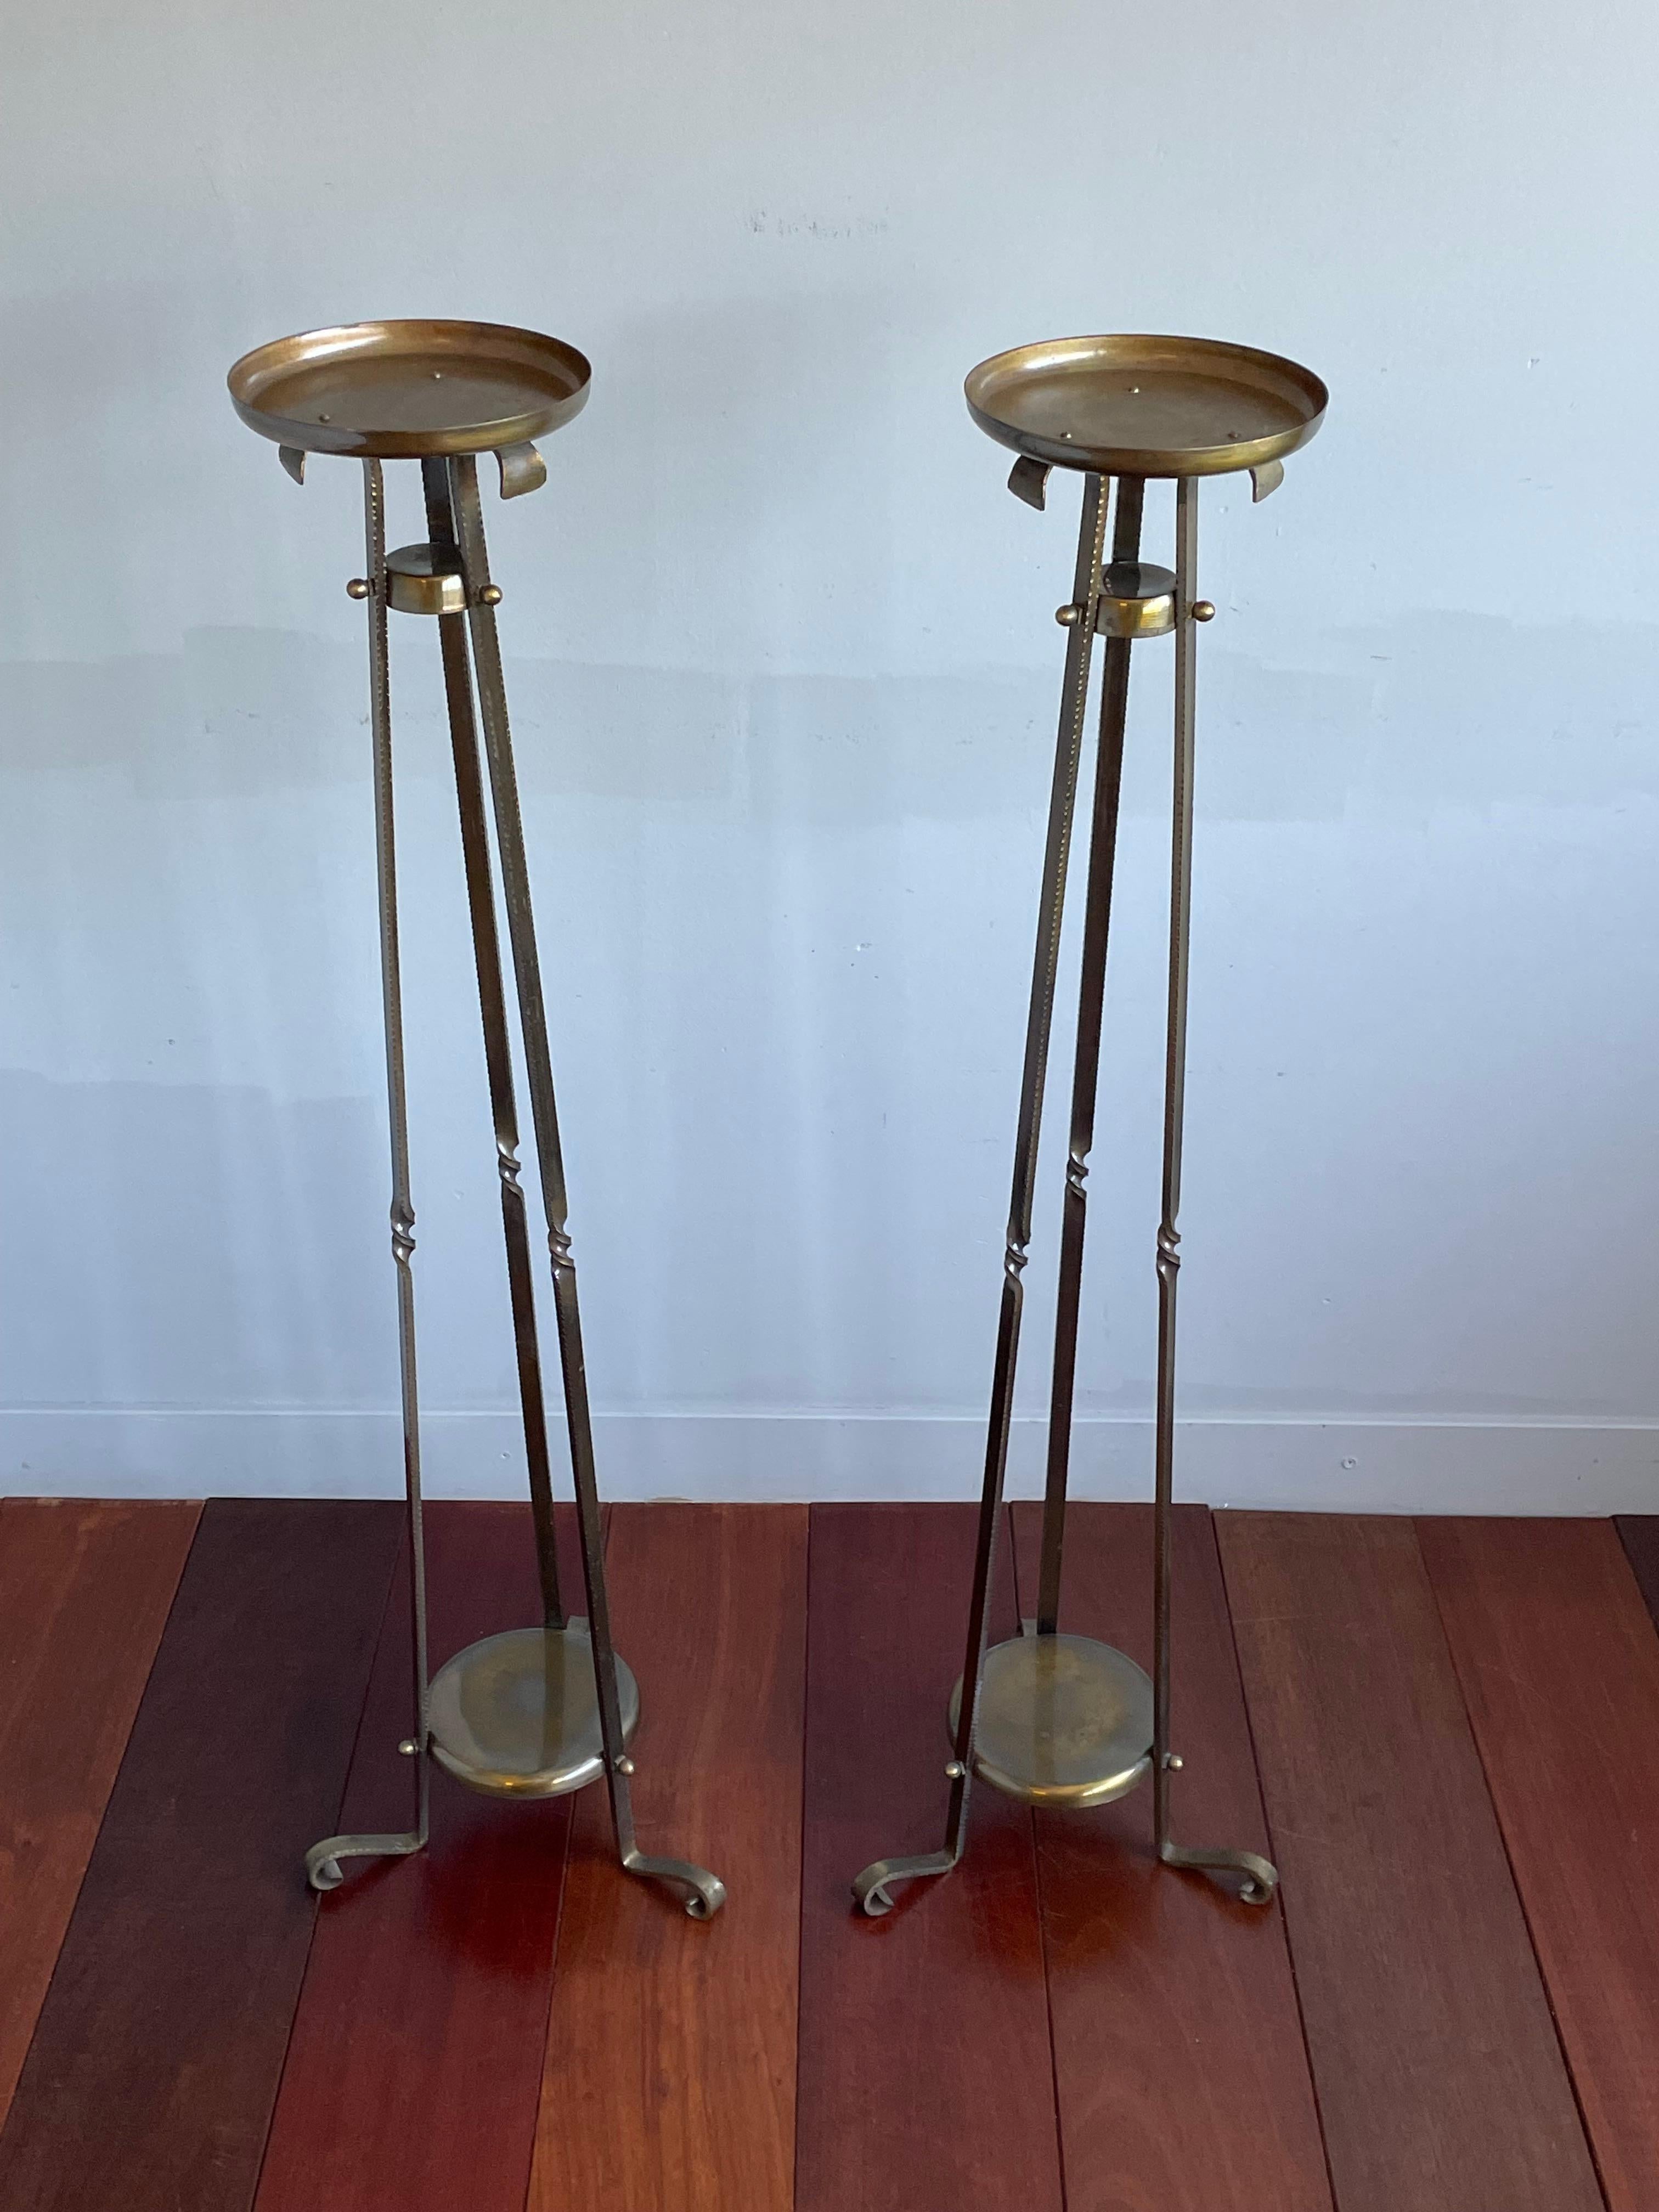 Stunning Pair of Forged Brass Arts and Crafts Church Altar Floor Candle Stands For Sale 3